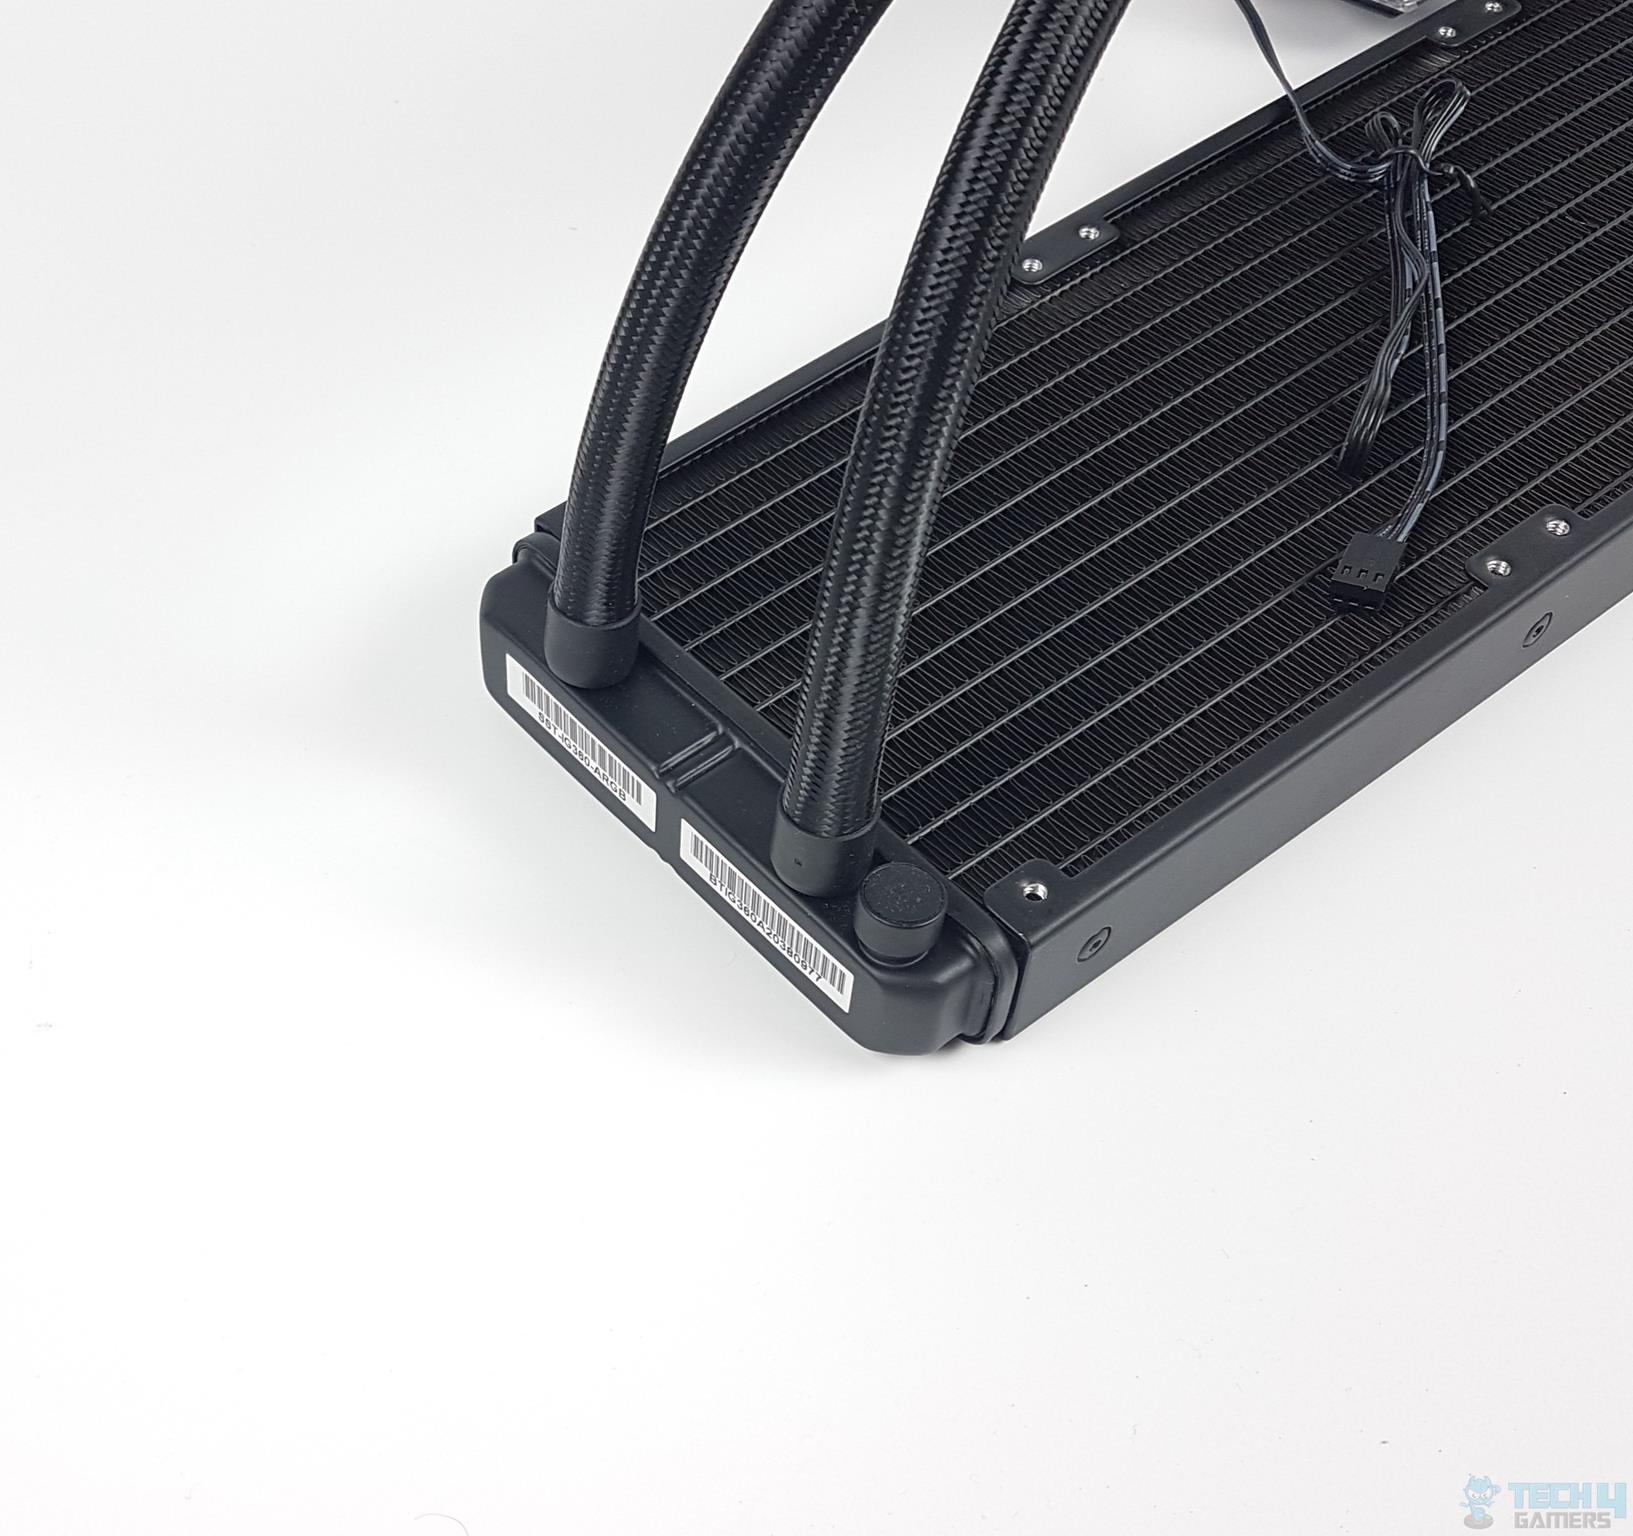 SilverStone iCEGEM 360 Liquid Cooler — The tube end of the radiator